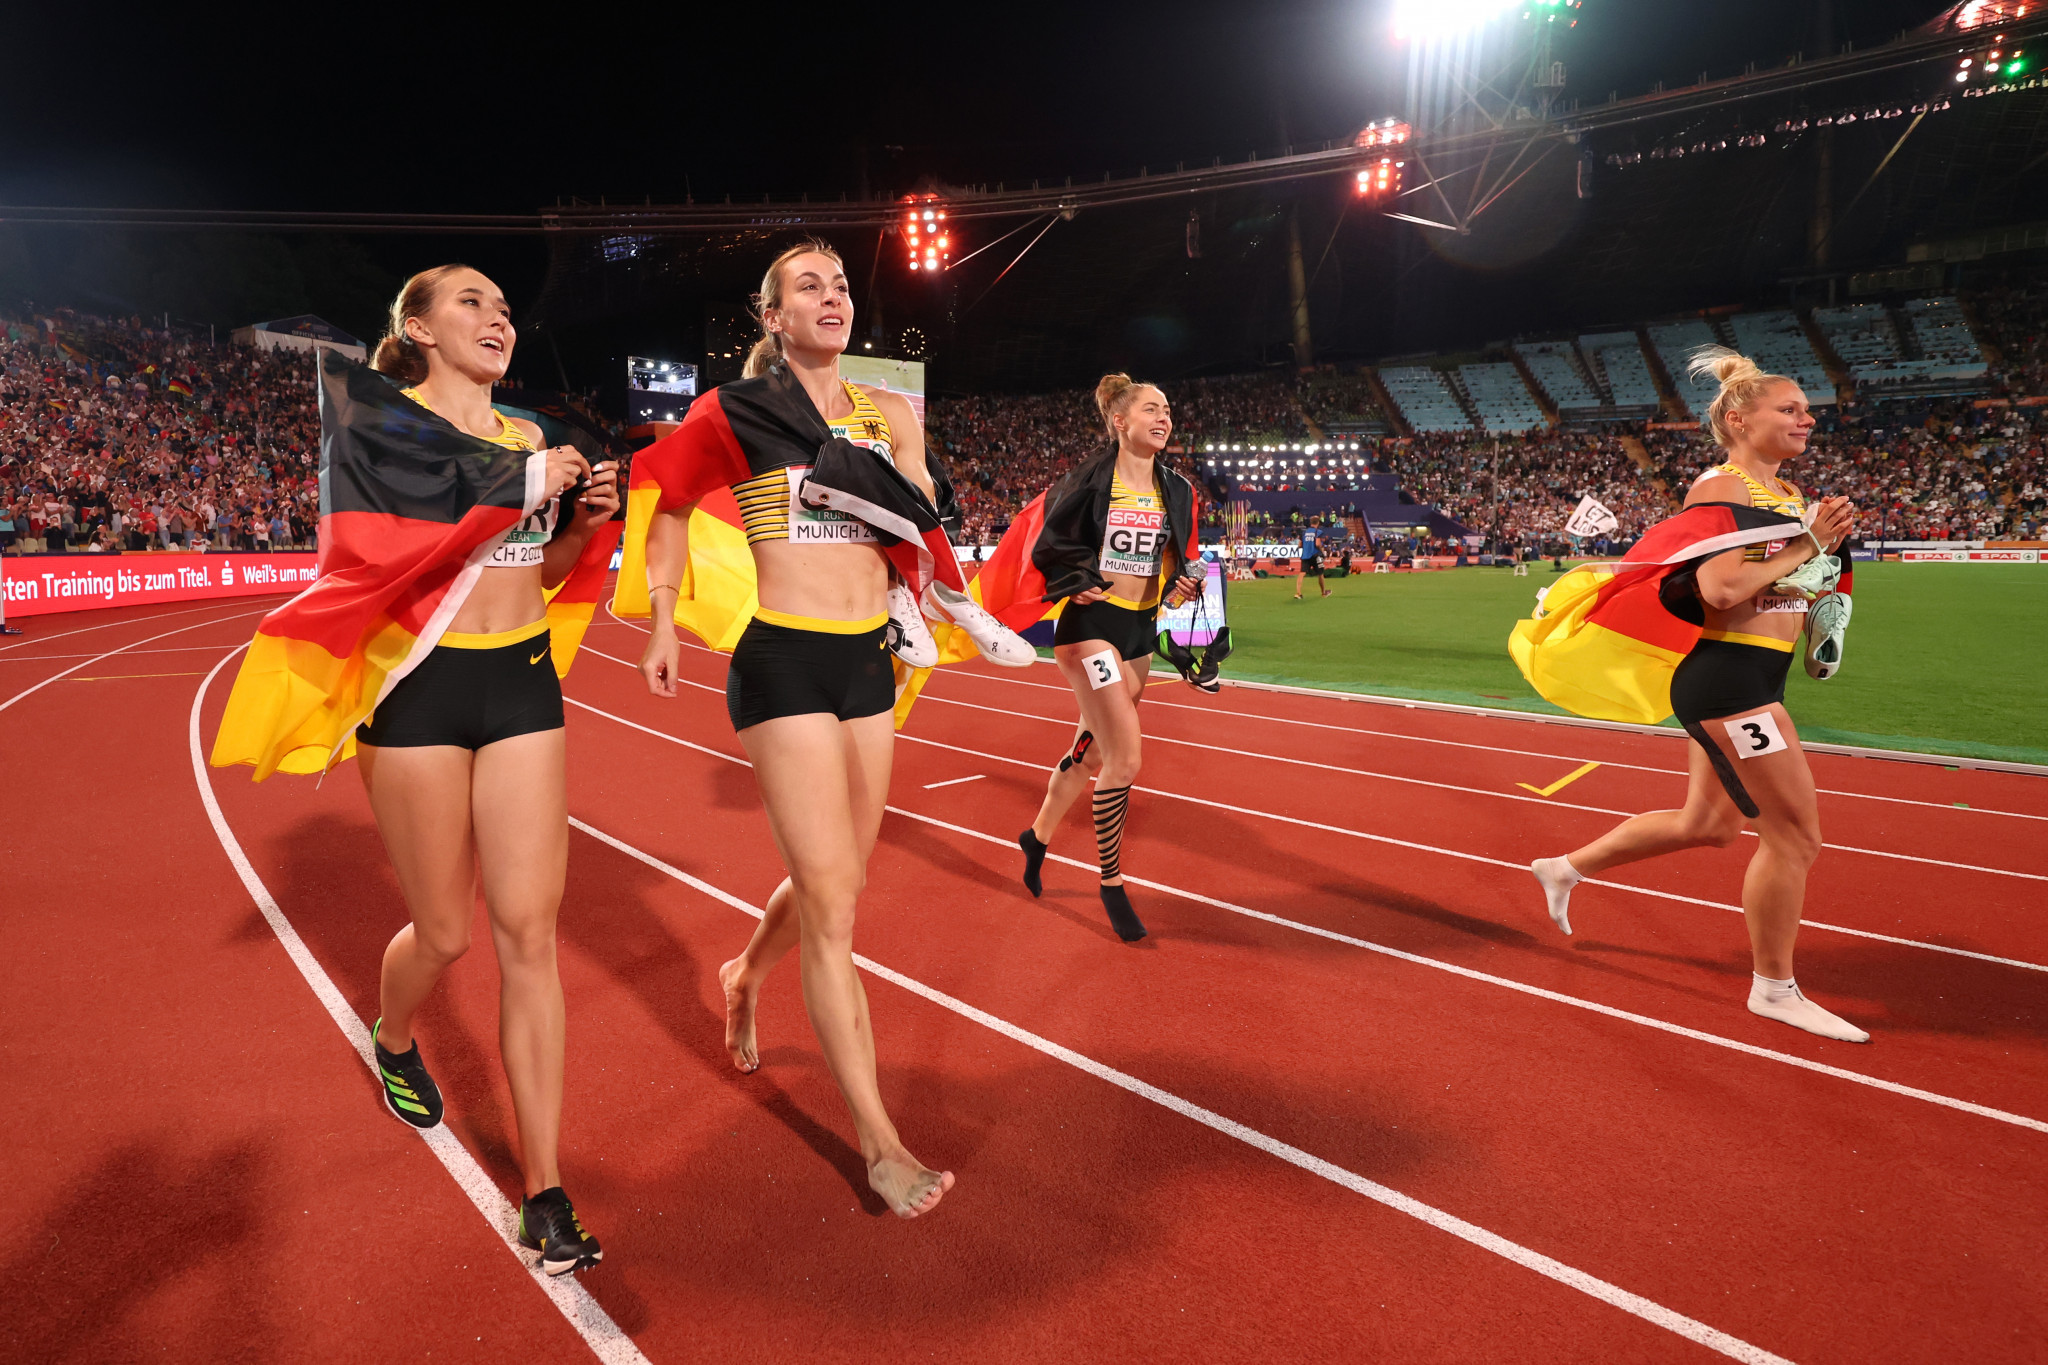 Hosts Germany won the women's 4x100 metres relay in front of a jubilant home crowd at the Olympiastadion to clinch top spot on the athletics medals table at Munich 2022 ©Getty Images